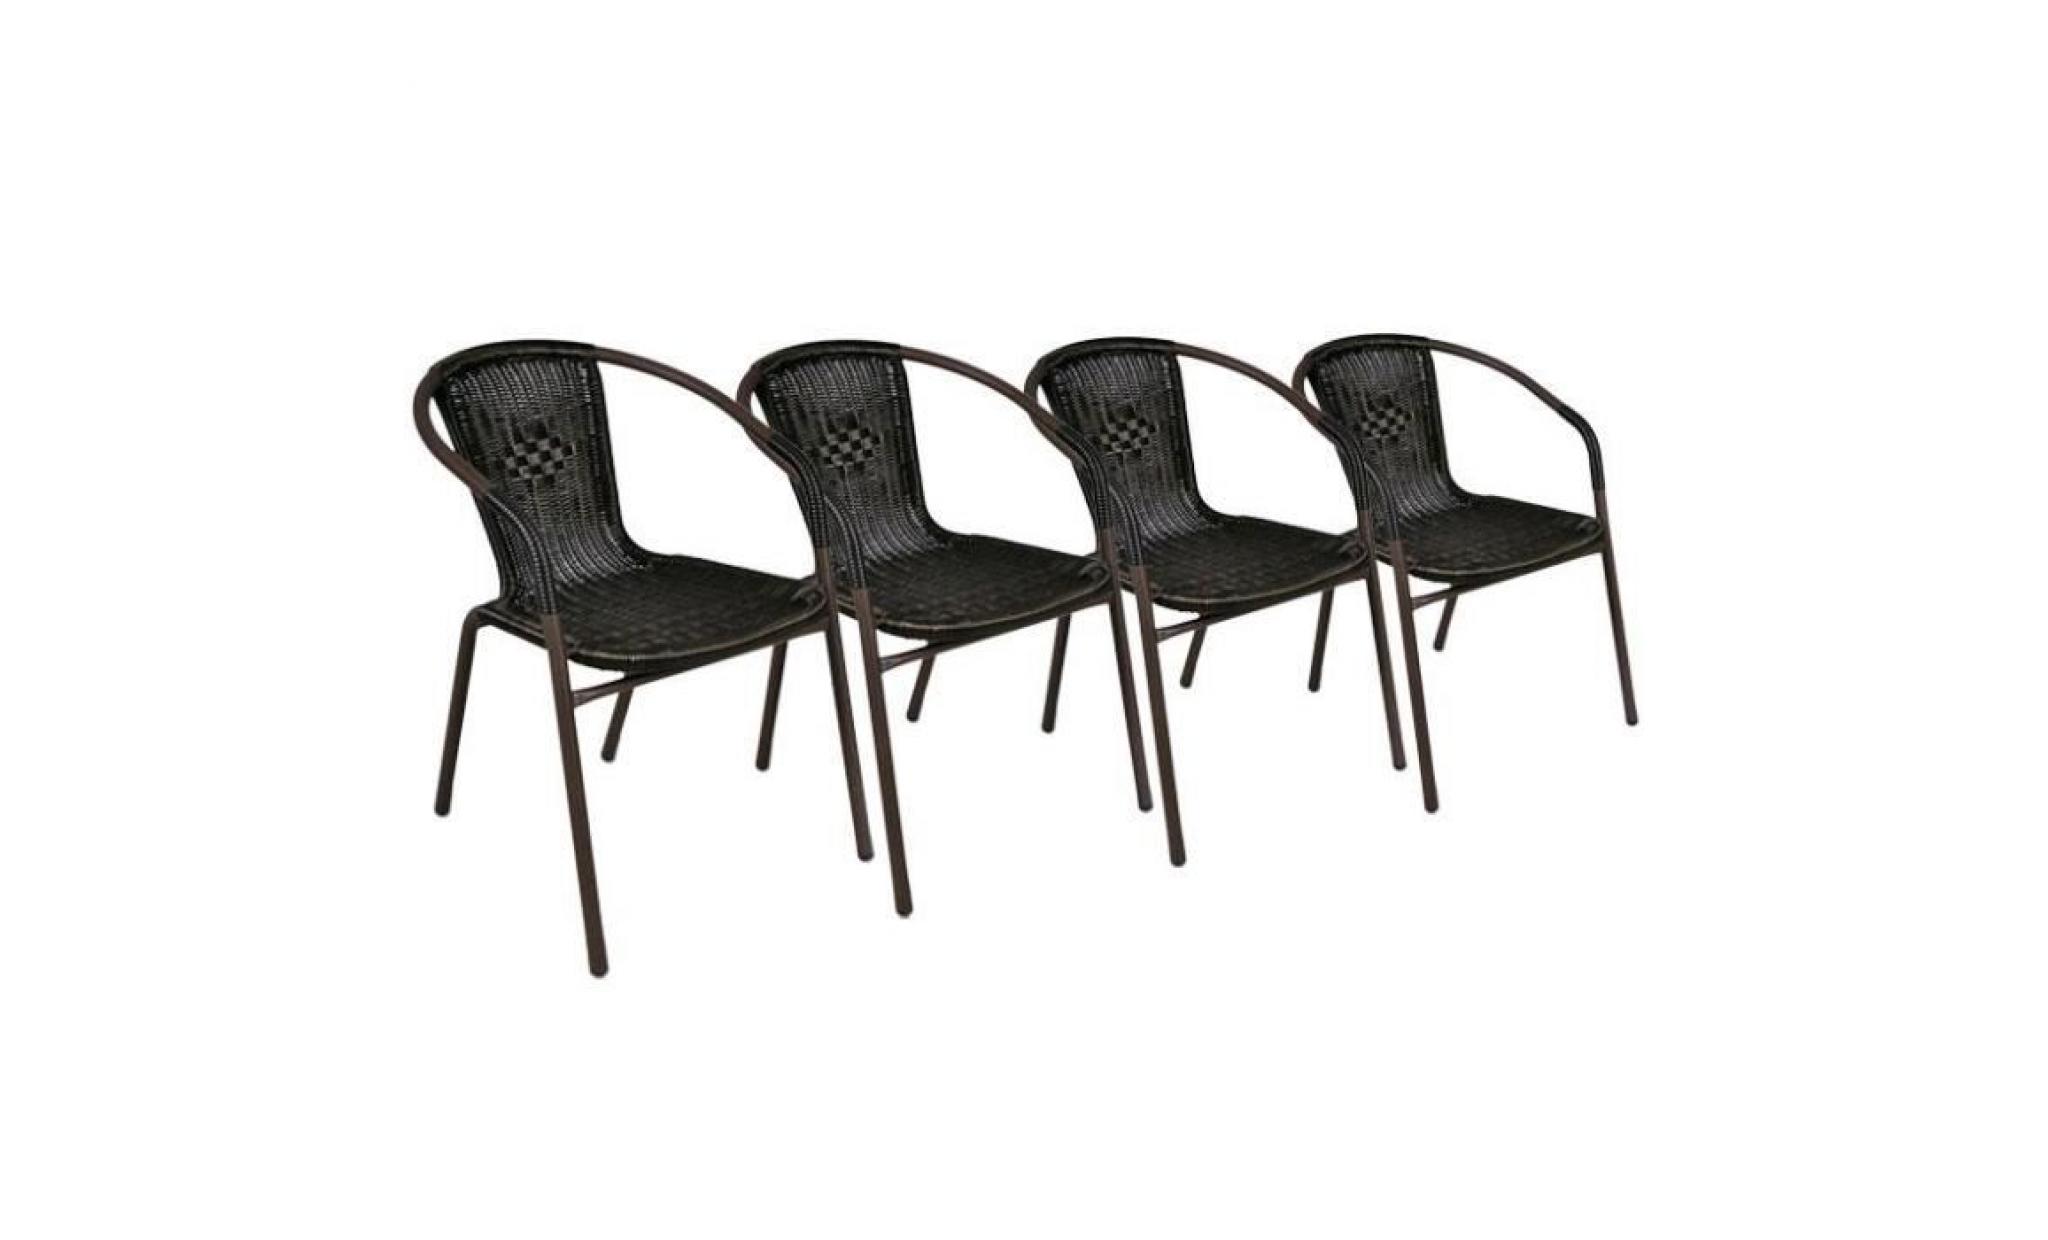 4 x chaises Bistrot poly rotin empilable